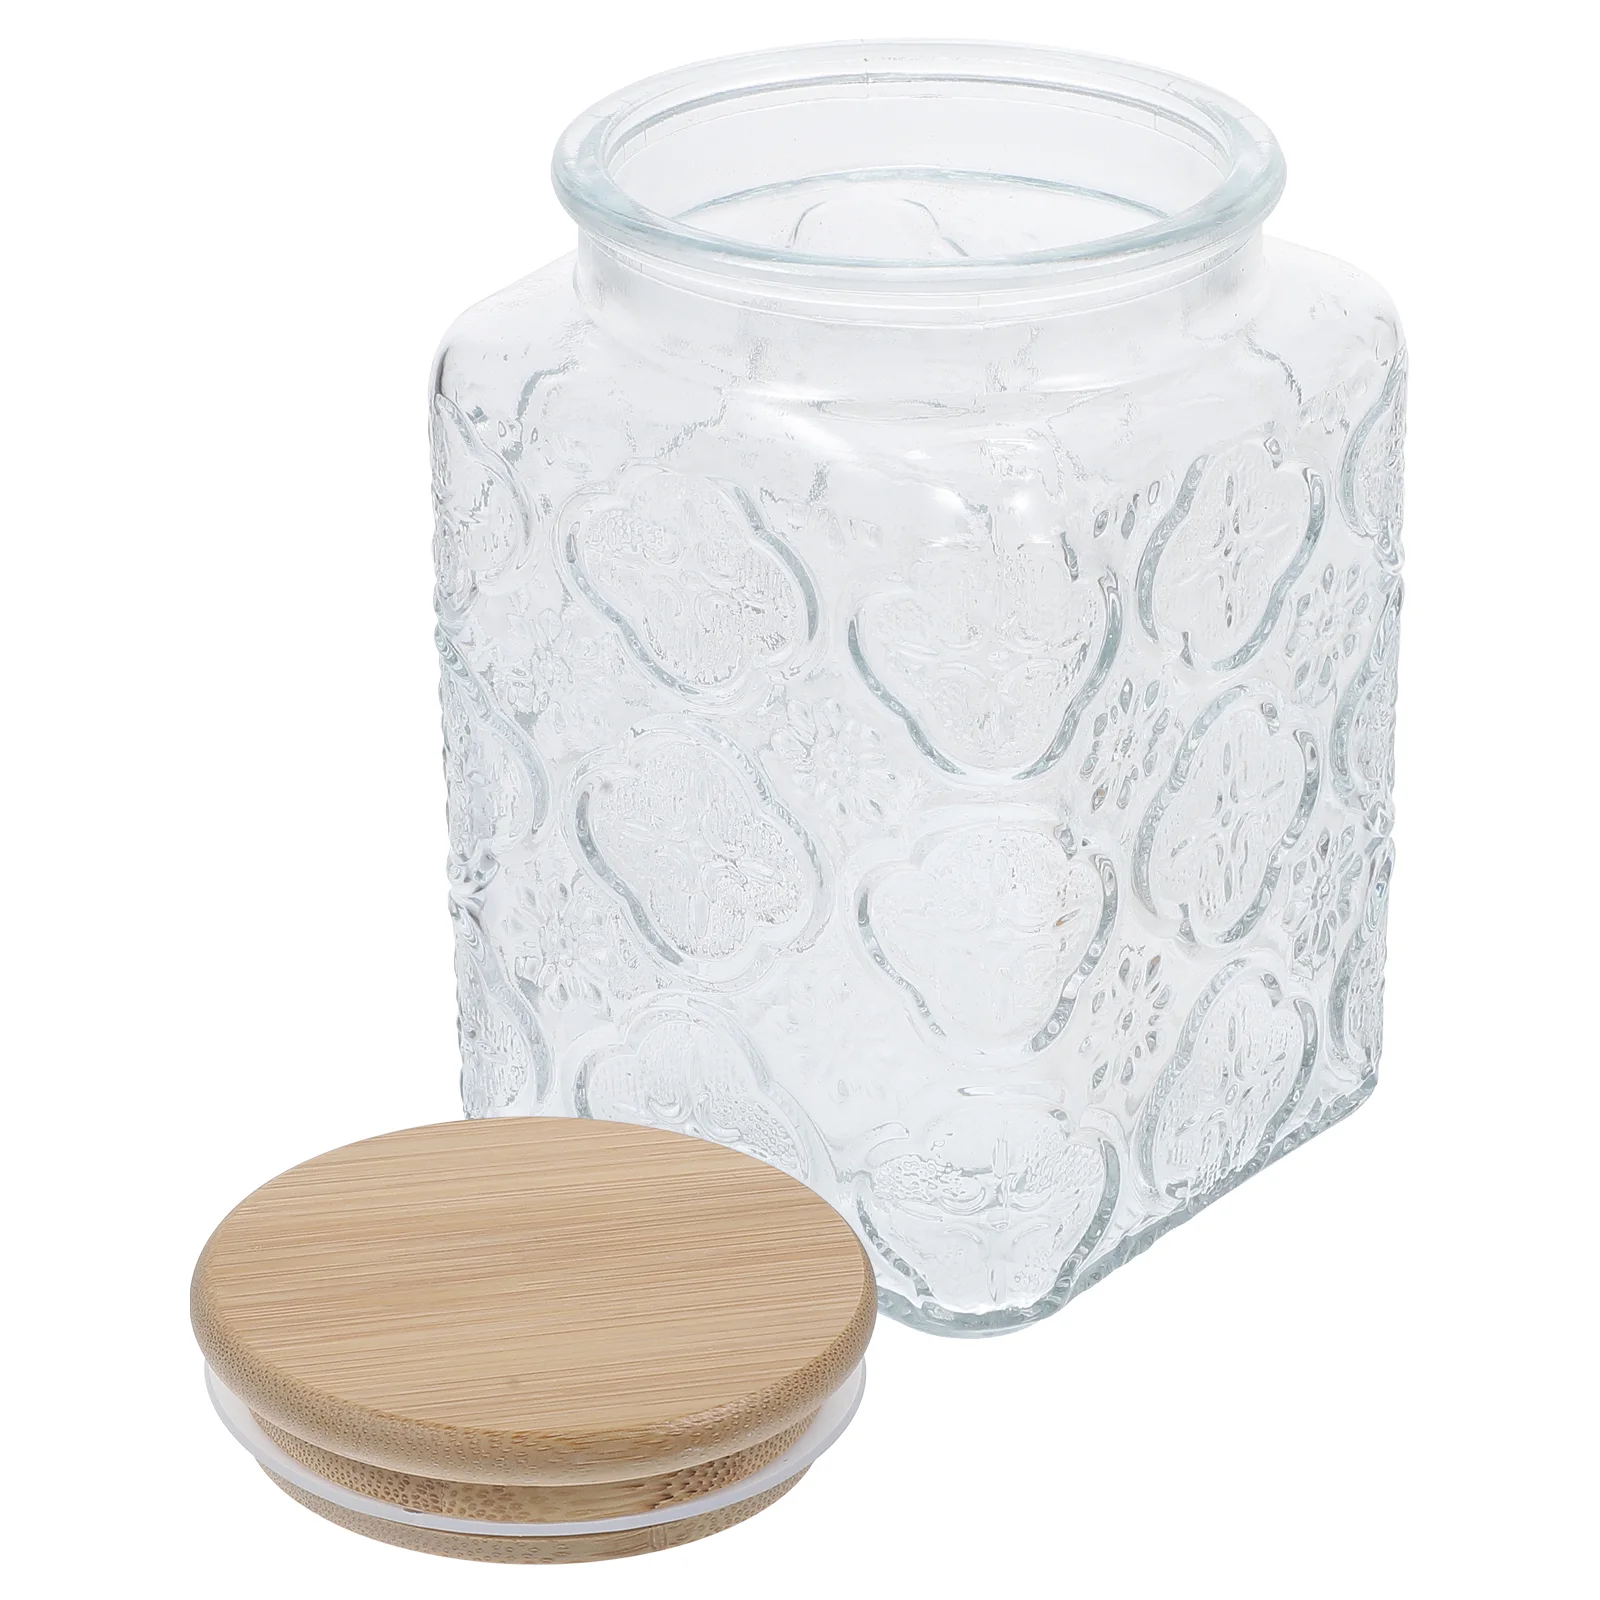 

3 Pcs Glass Jar Sealed Bamboo Lids Kitchen Canisters Coffee Bean Container Nut Grain Storage Dried Fruit Tea Sugar Jars